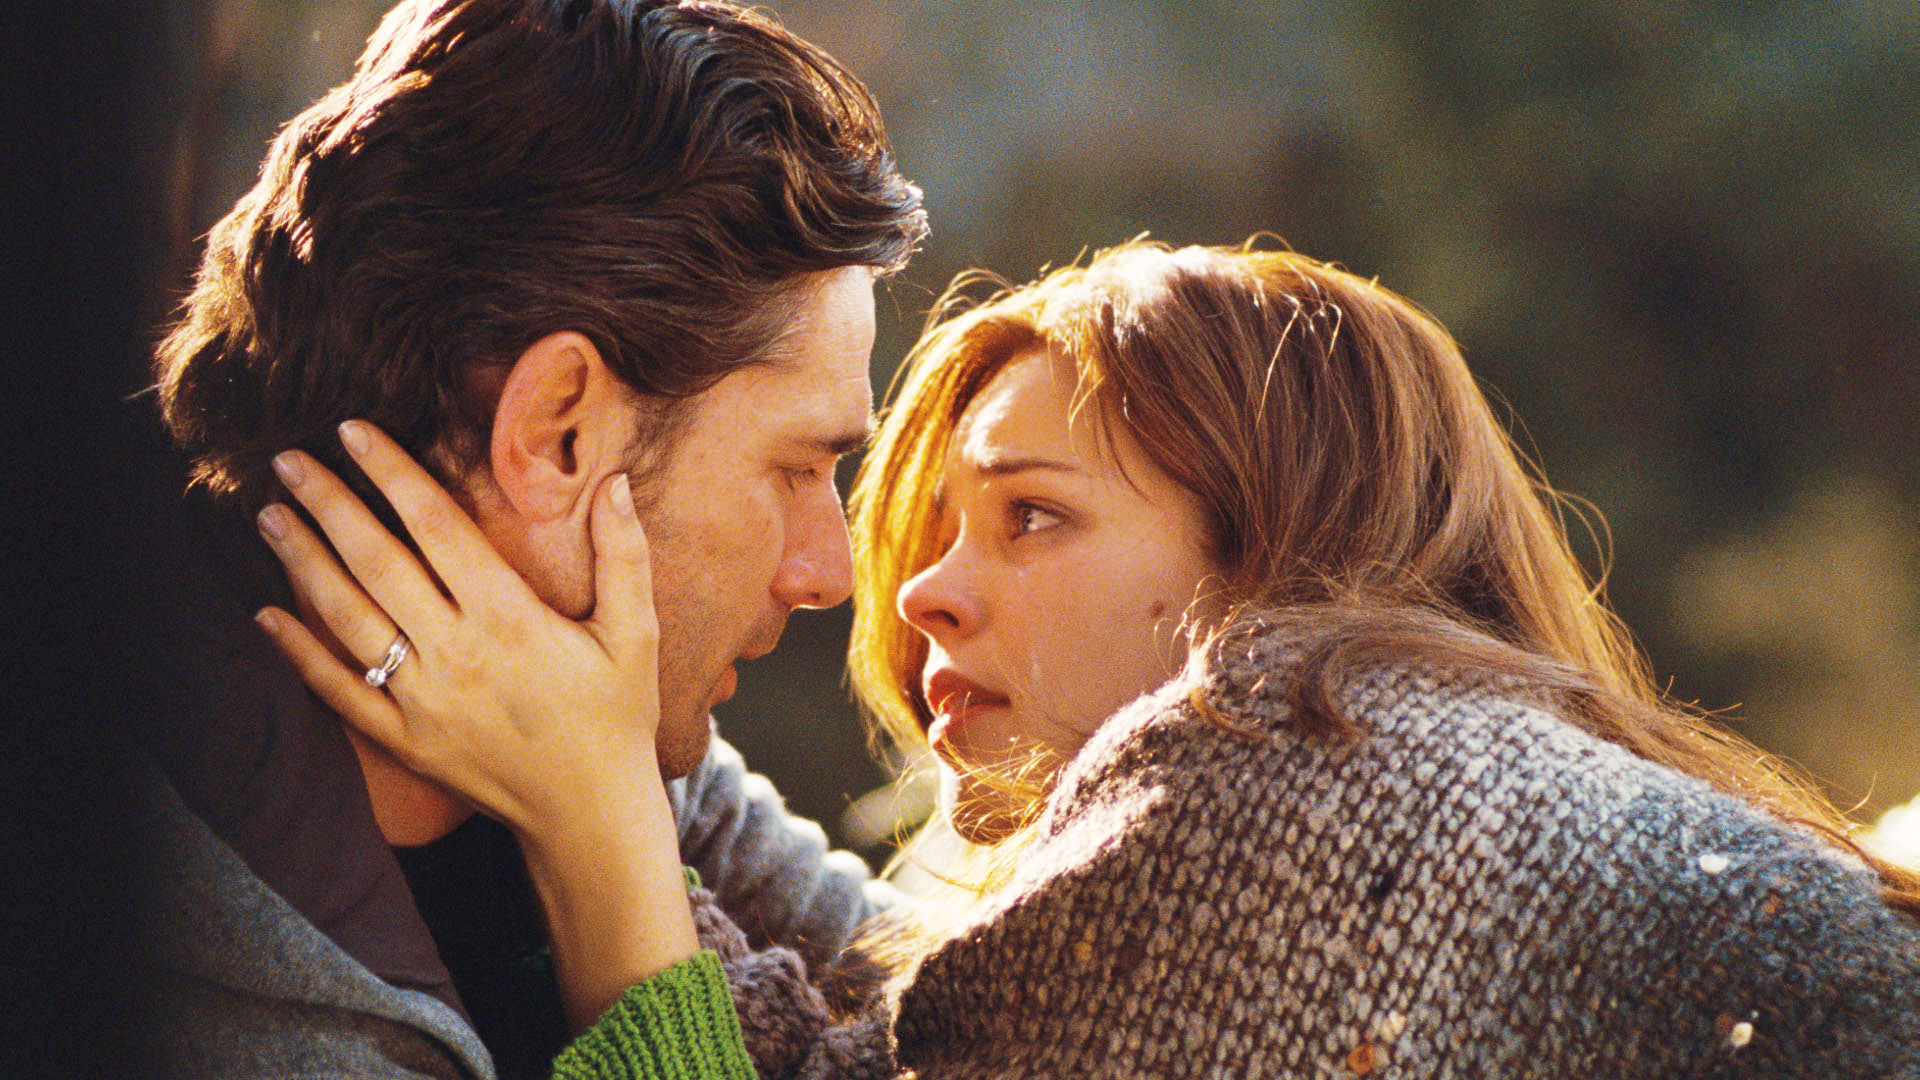 Eric Bana stars as Henry DeTamble and Rachel McAdams stars as Clare Abshire in New Line Cinema's The Time Traveler's Wife (2009)